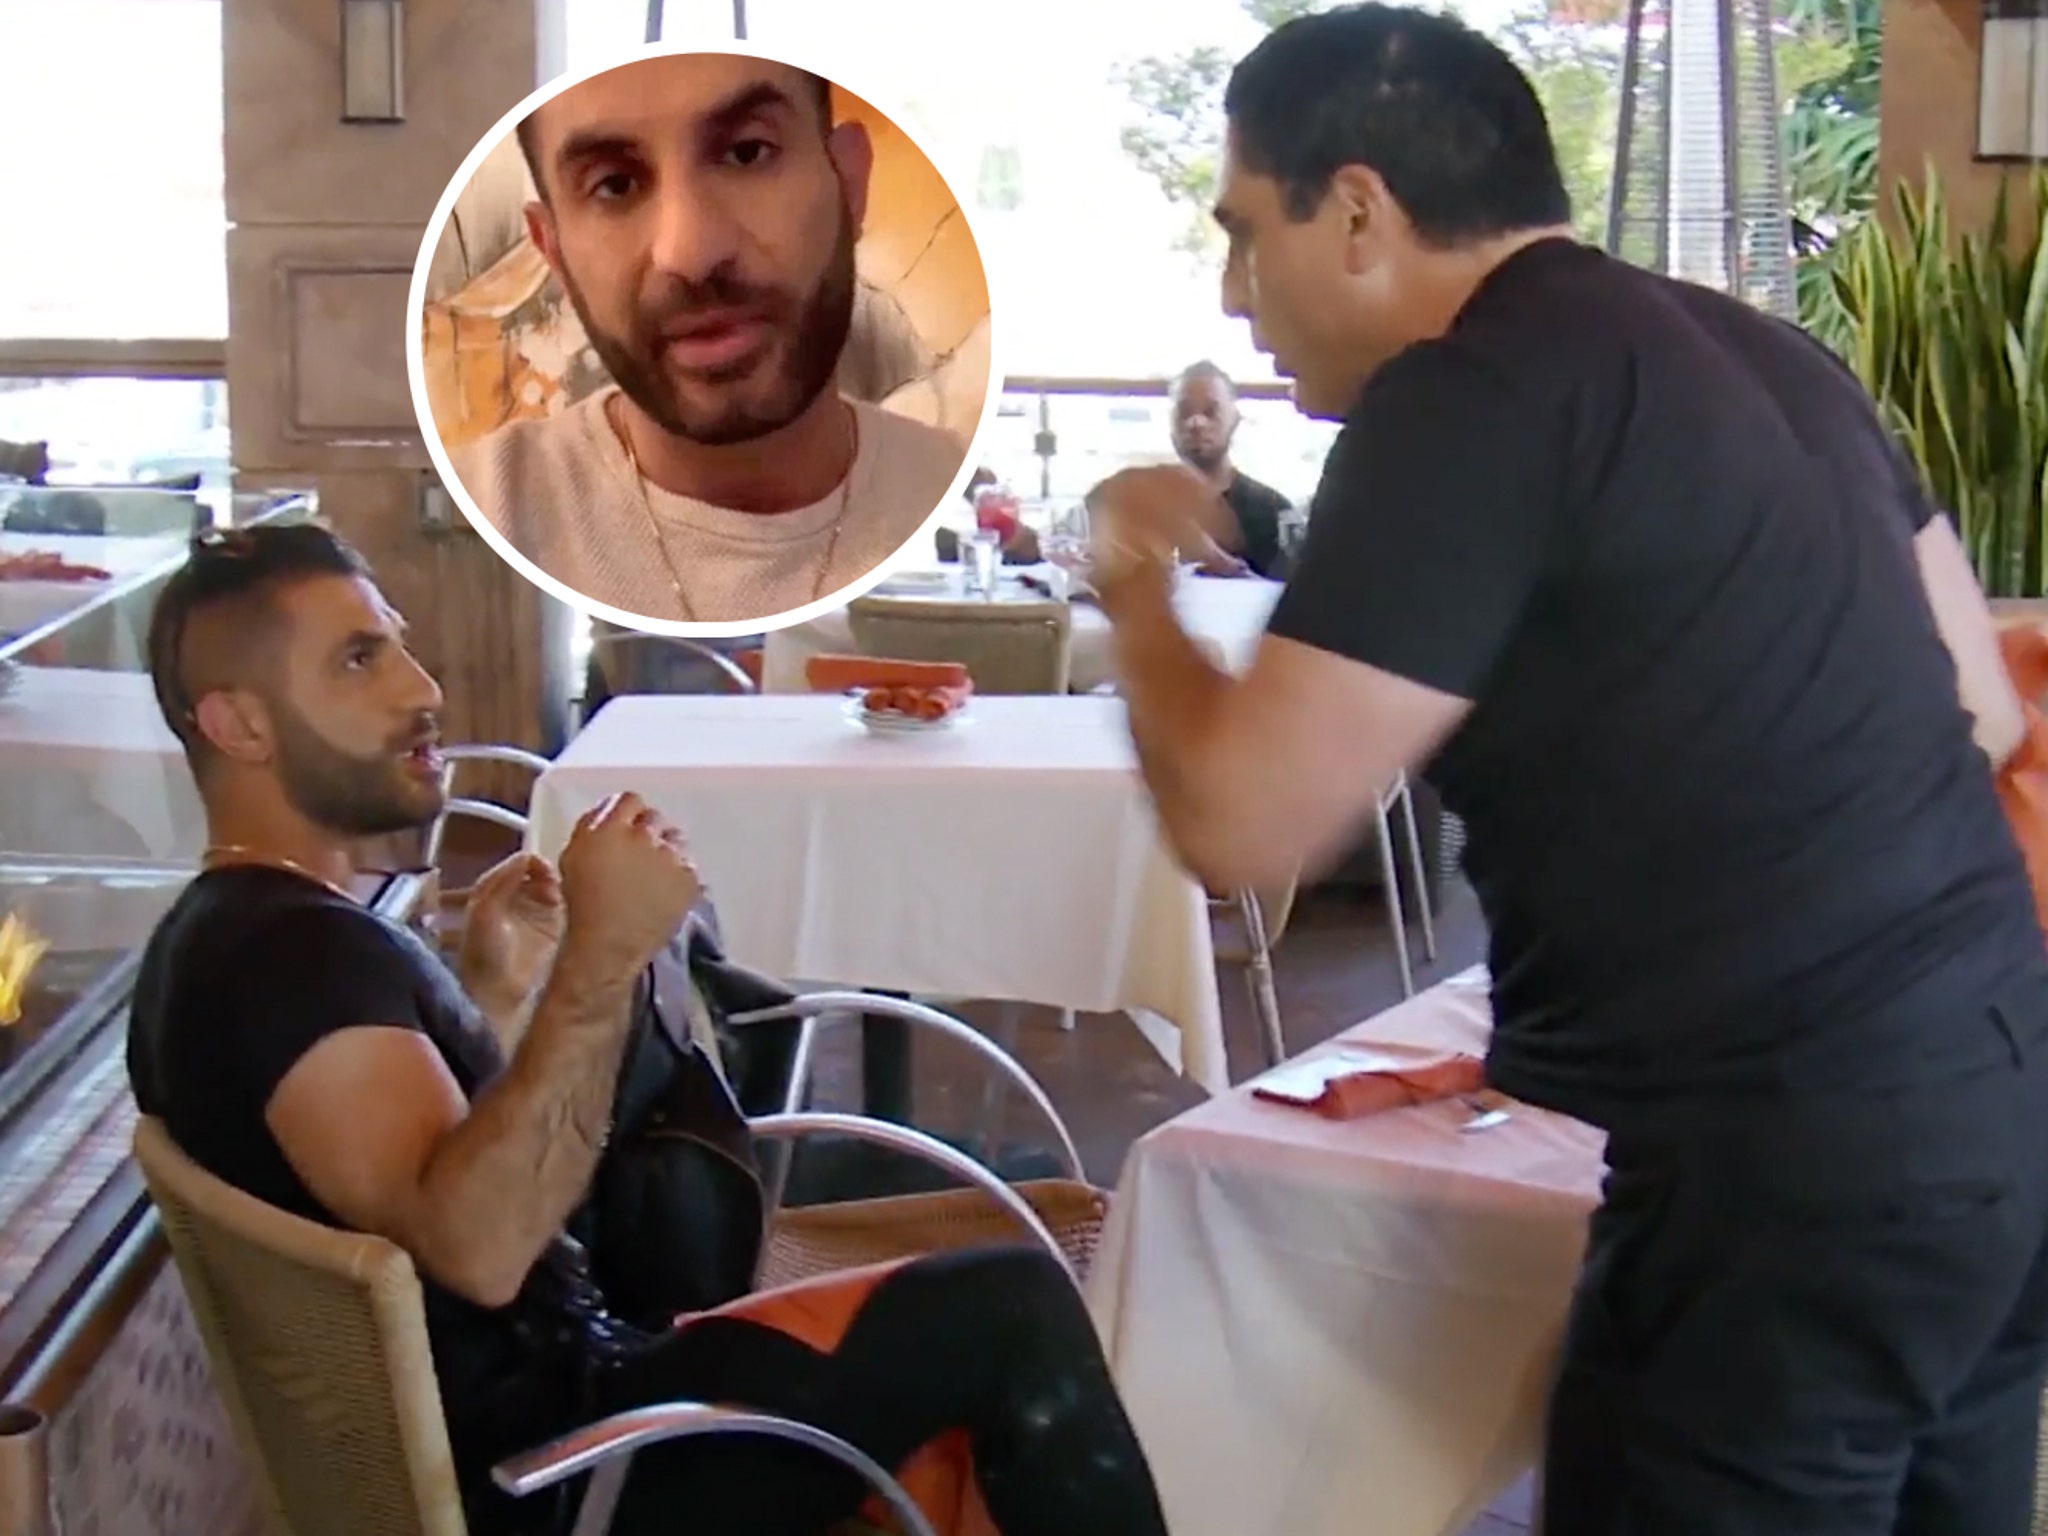 Mercedes Javid Hd Porn Sex Videos - Shahs of Sunset: Ali Ashouri Shares His Side of the Story of MJ-Reza Feud